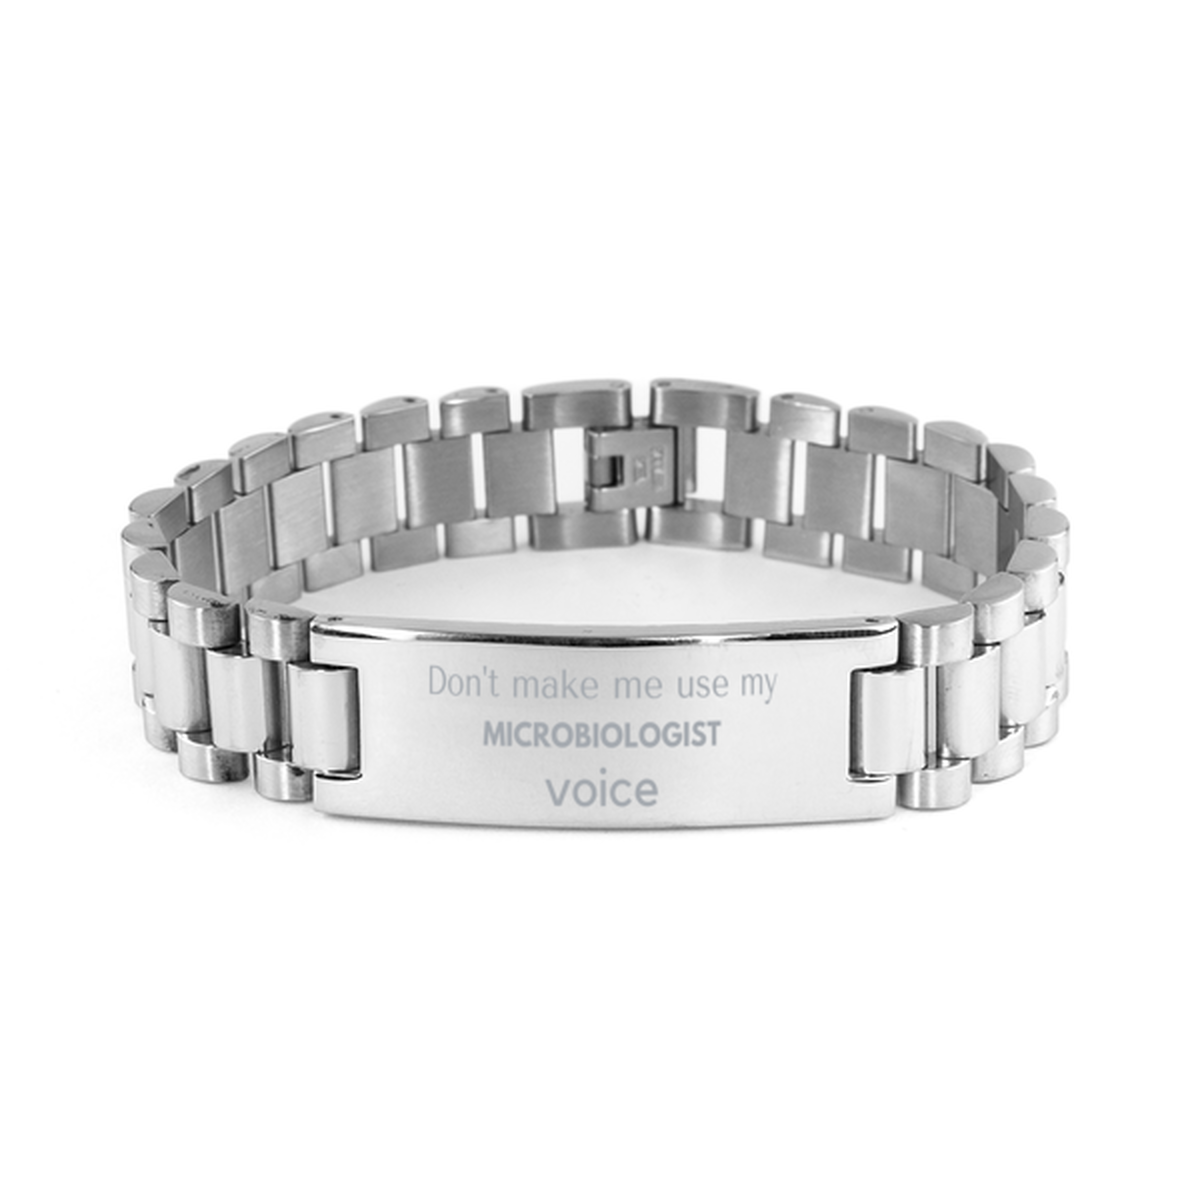 Don't make me use my Microbiologist voice, Sarcasm Microbiologist Gifts, Christmas Microbiologist Ladder Stainless Steel Bracelet Birthday Unique Gifts For Microbiologist Coworkers, Men, Women, Colleague, Friends